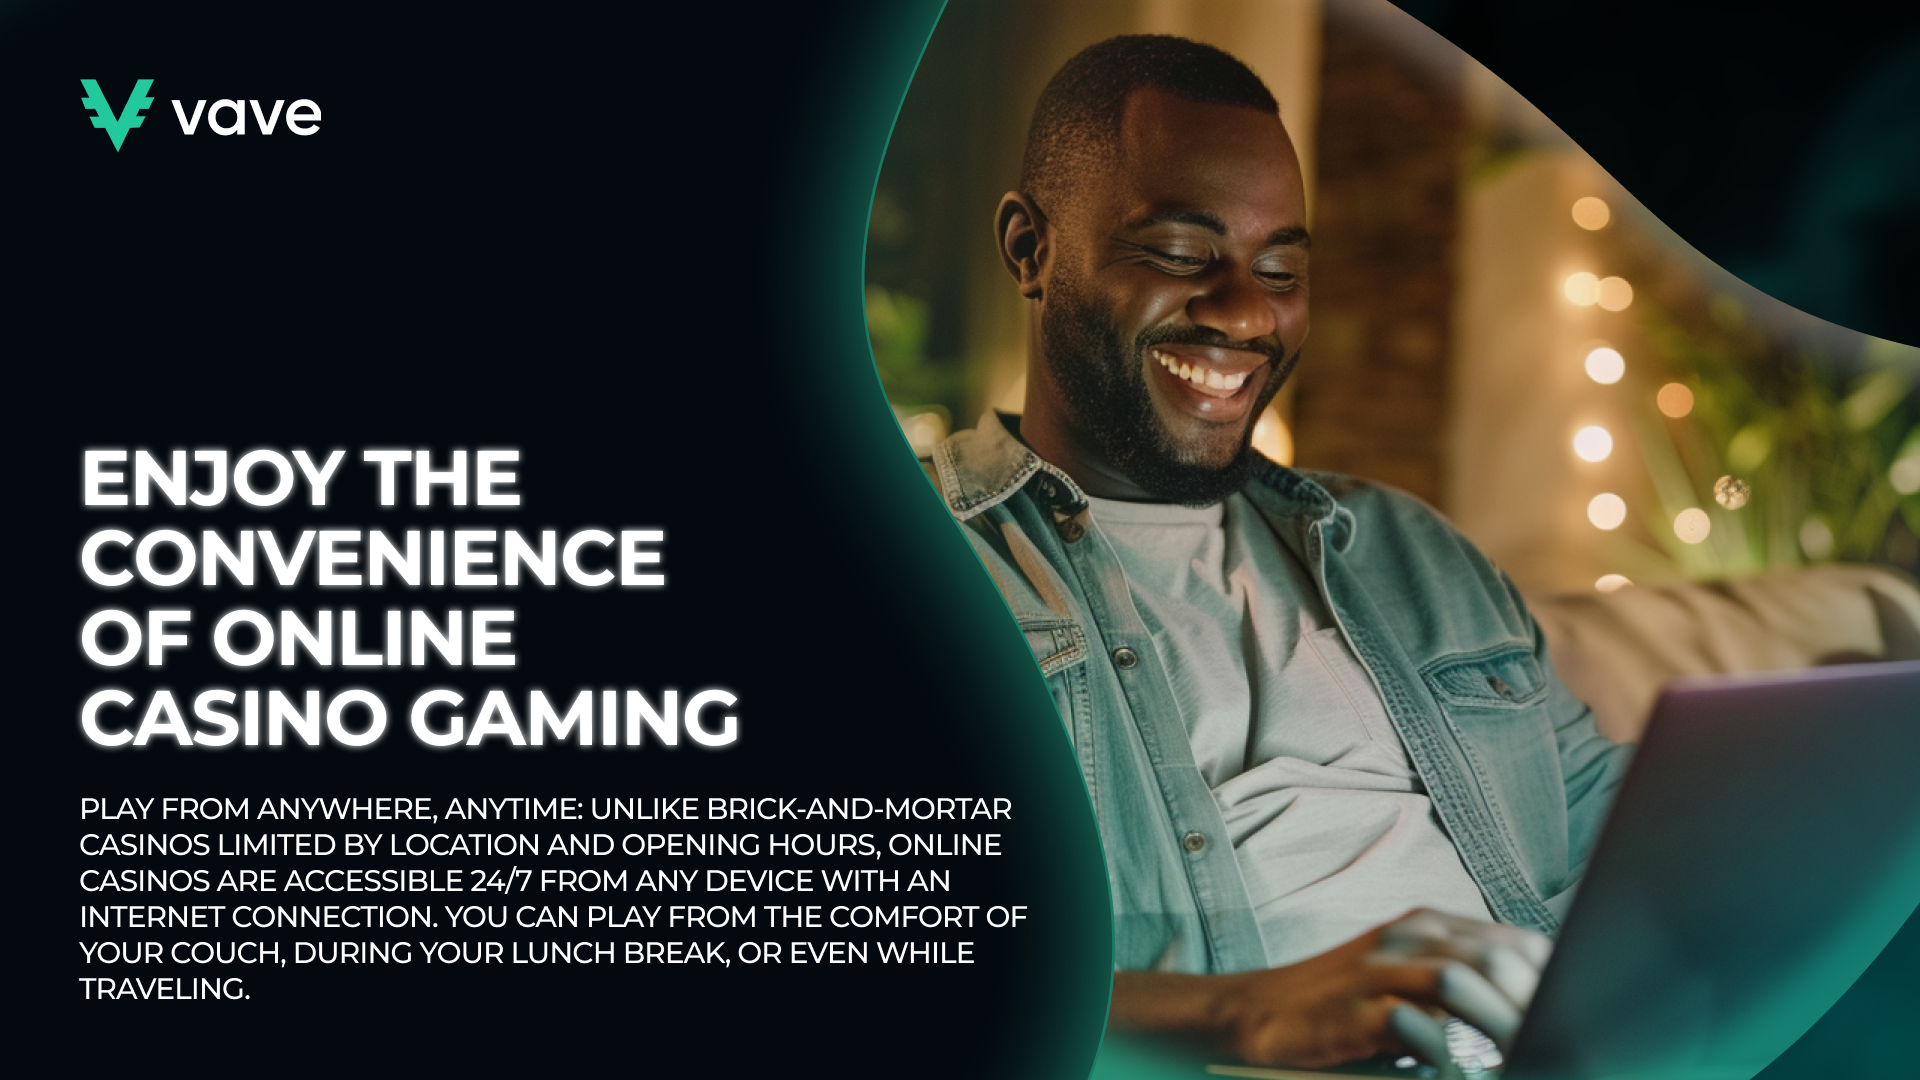 Convenience of online gaming